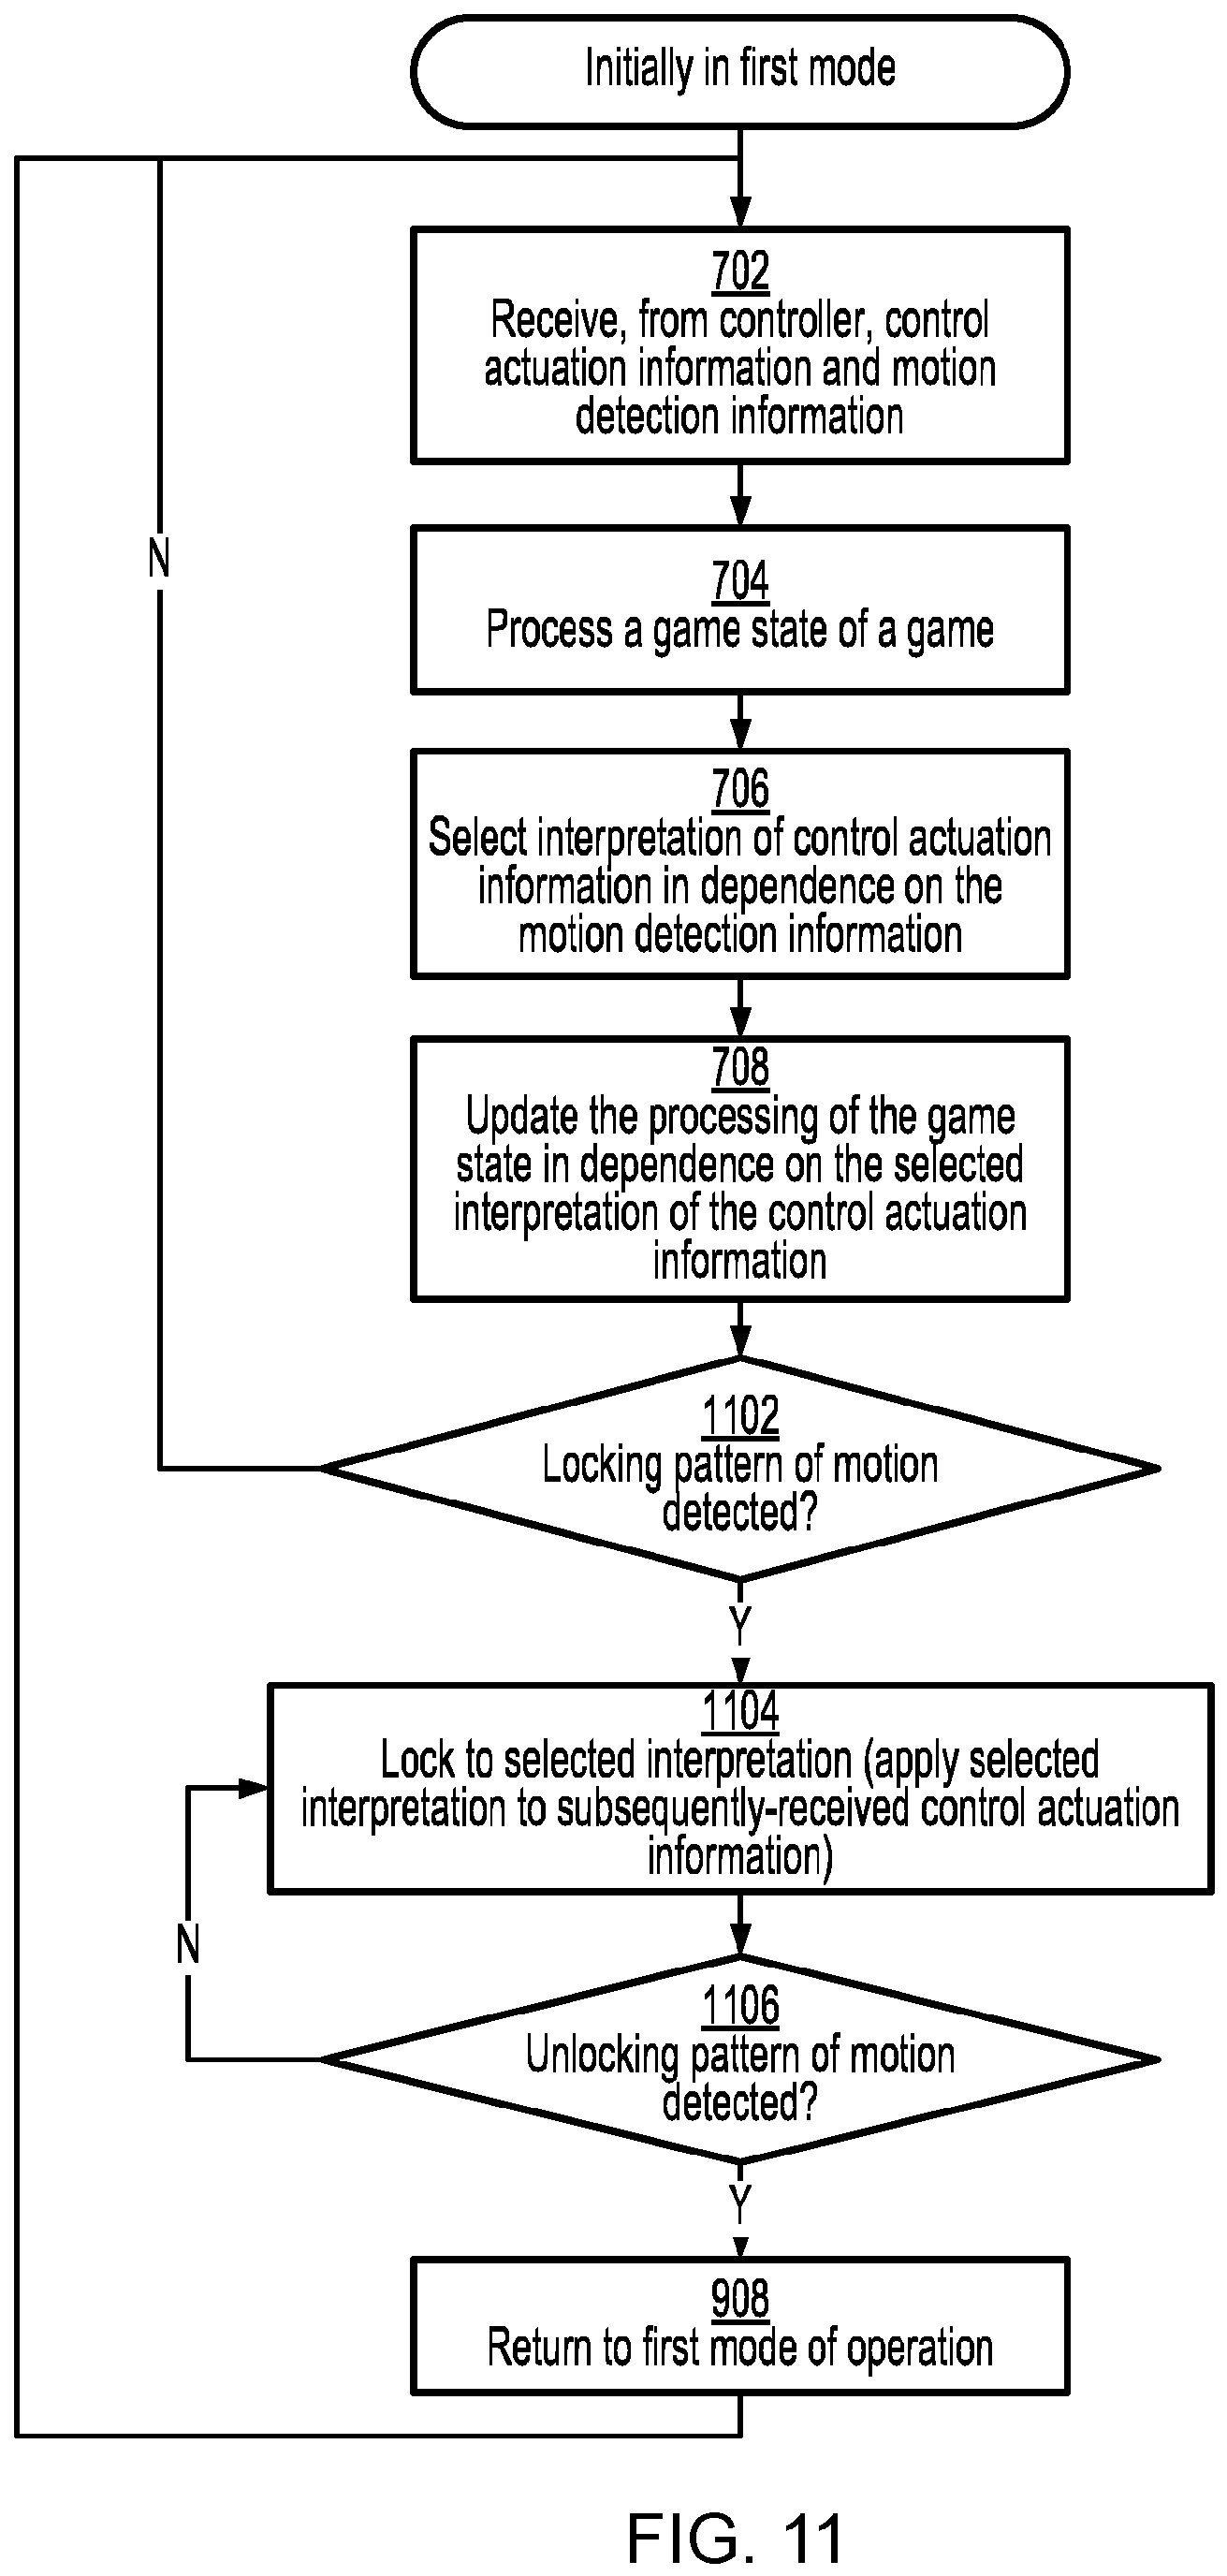 The flowchart shows an example method of switching between both modes.